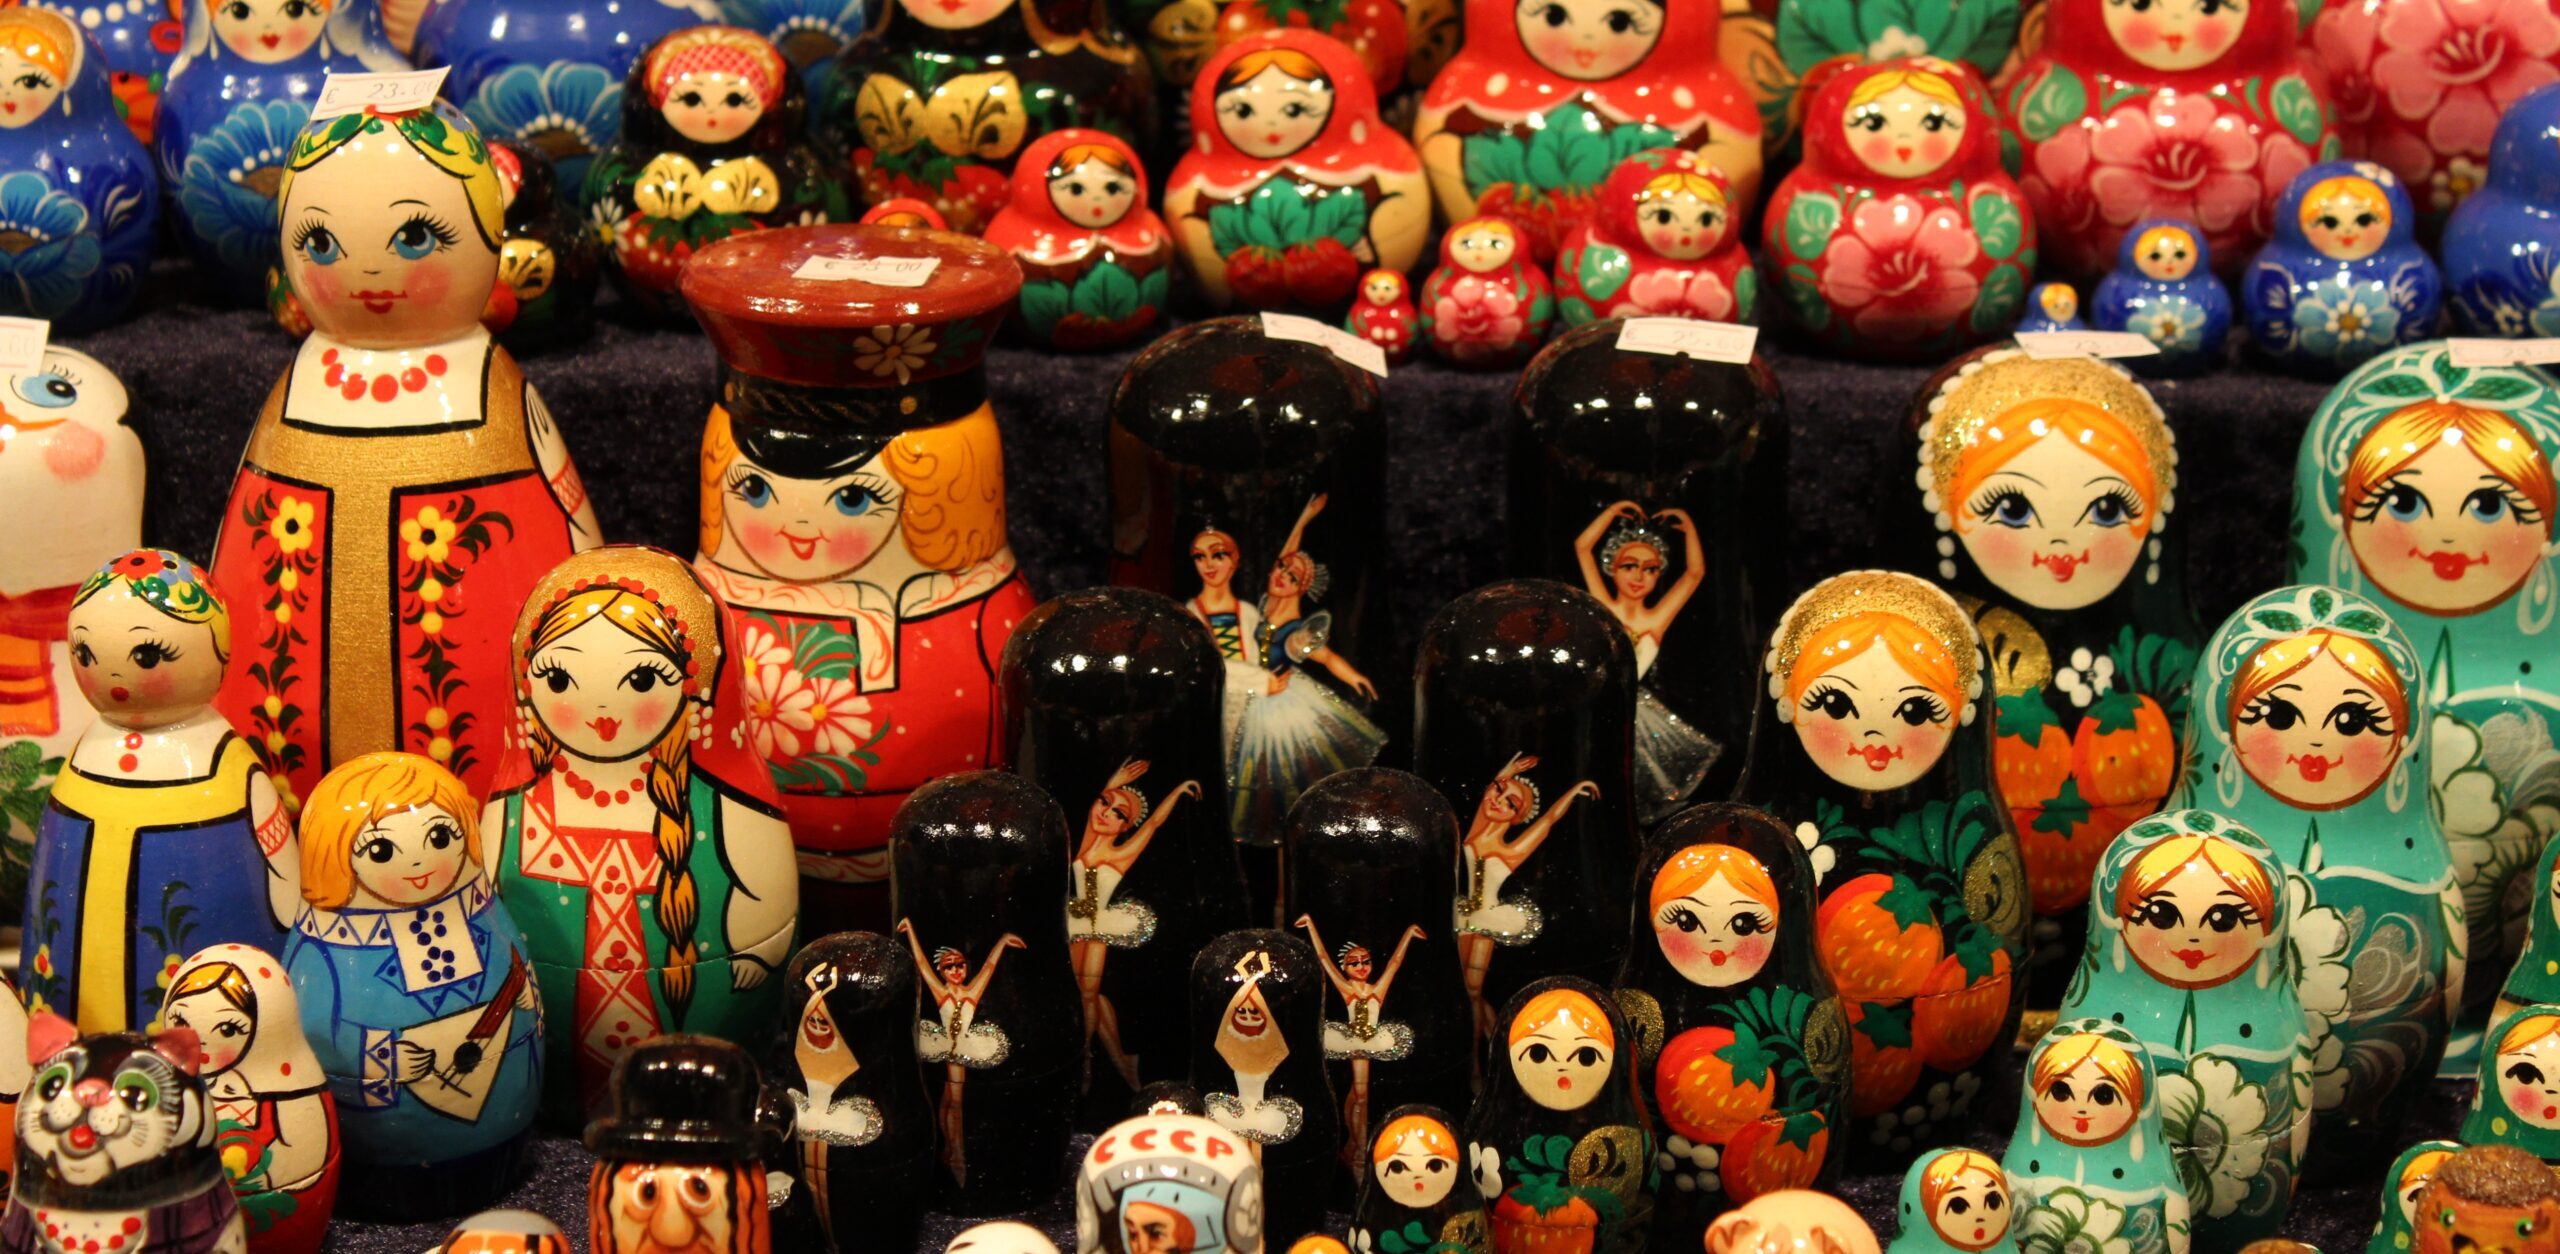 Rows of colorful Russian nesting dolls of different sizes